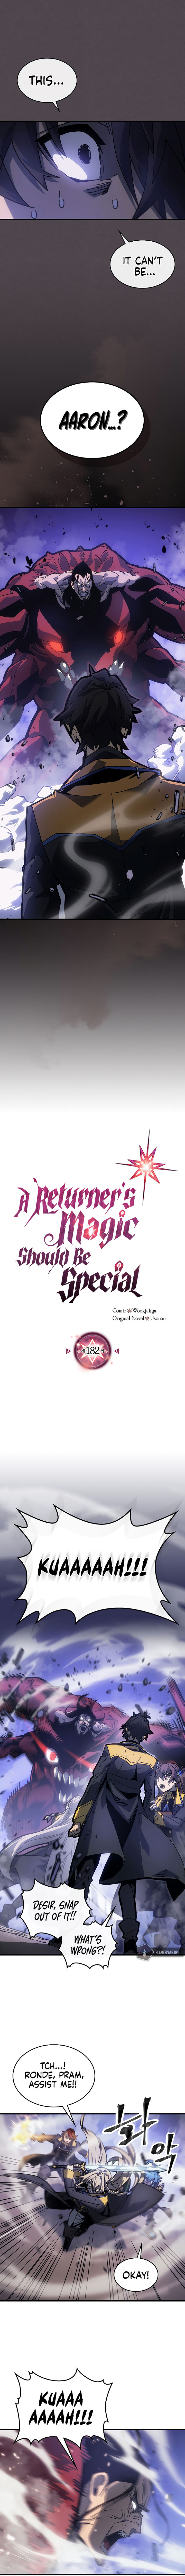 A Returner's Magic Should Be Special - Chapter 182 Page 2